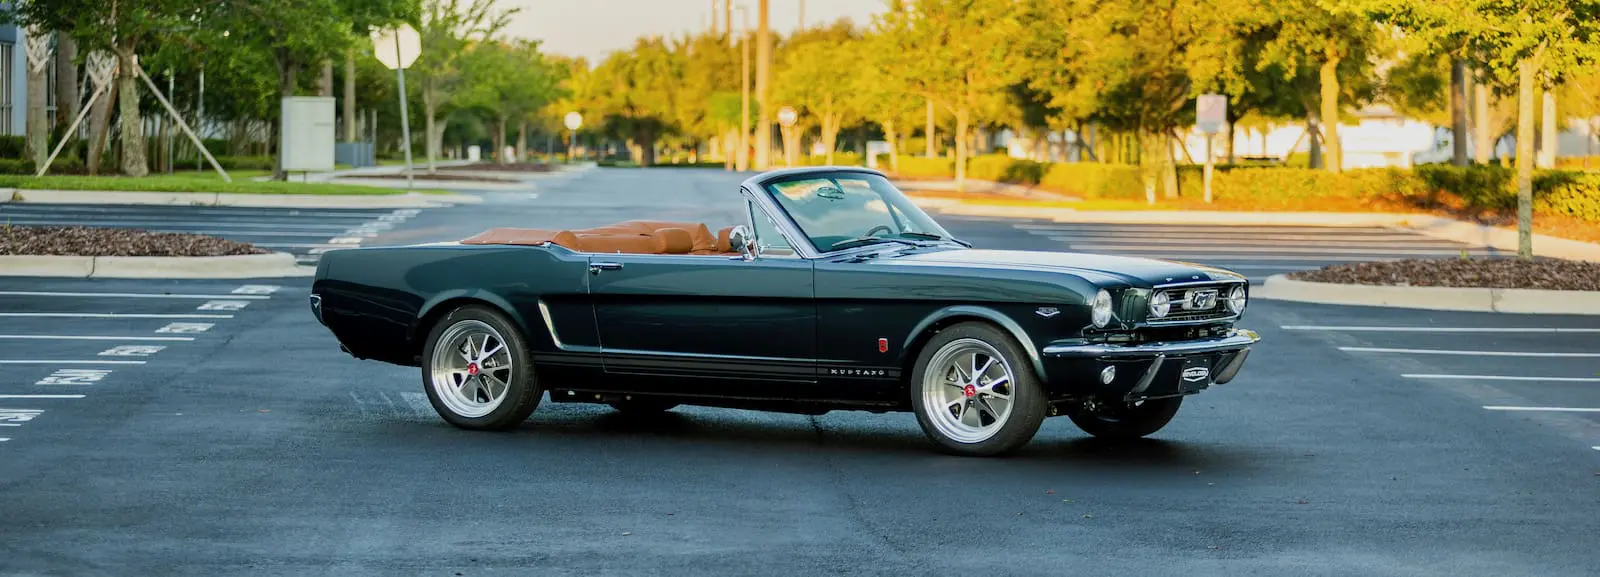 A lateral view of a 1966 Mustang Convertible.